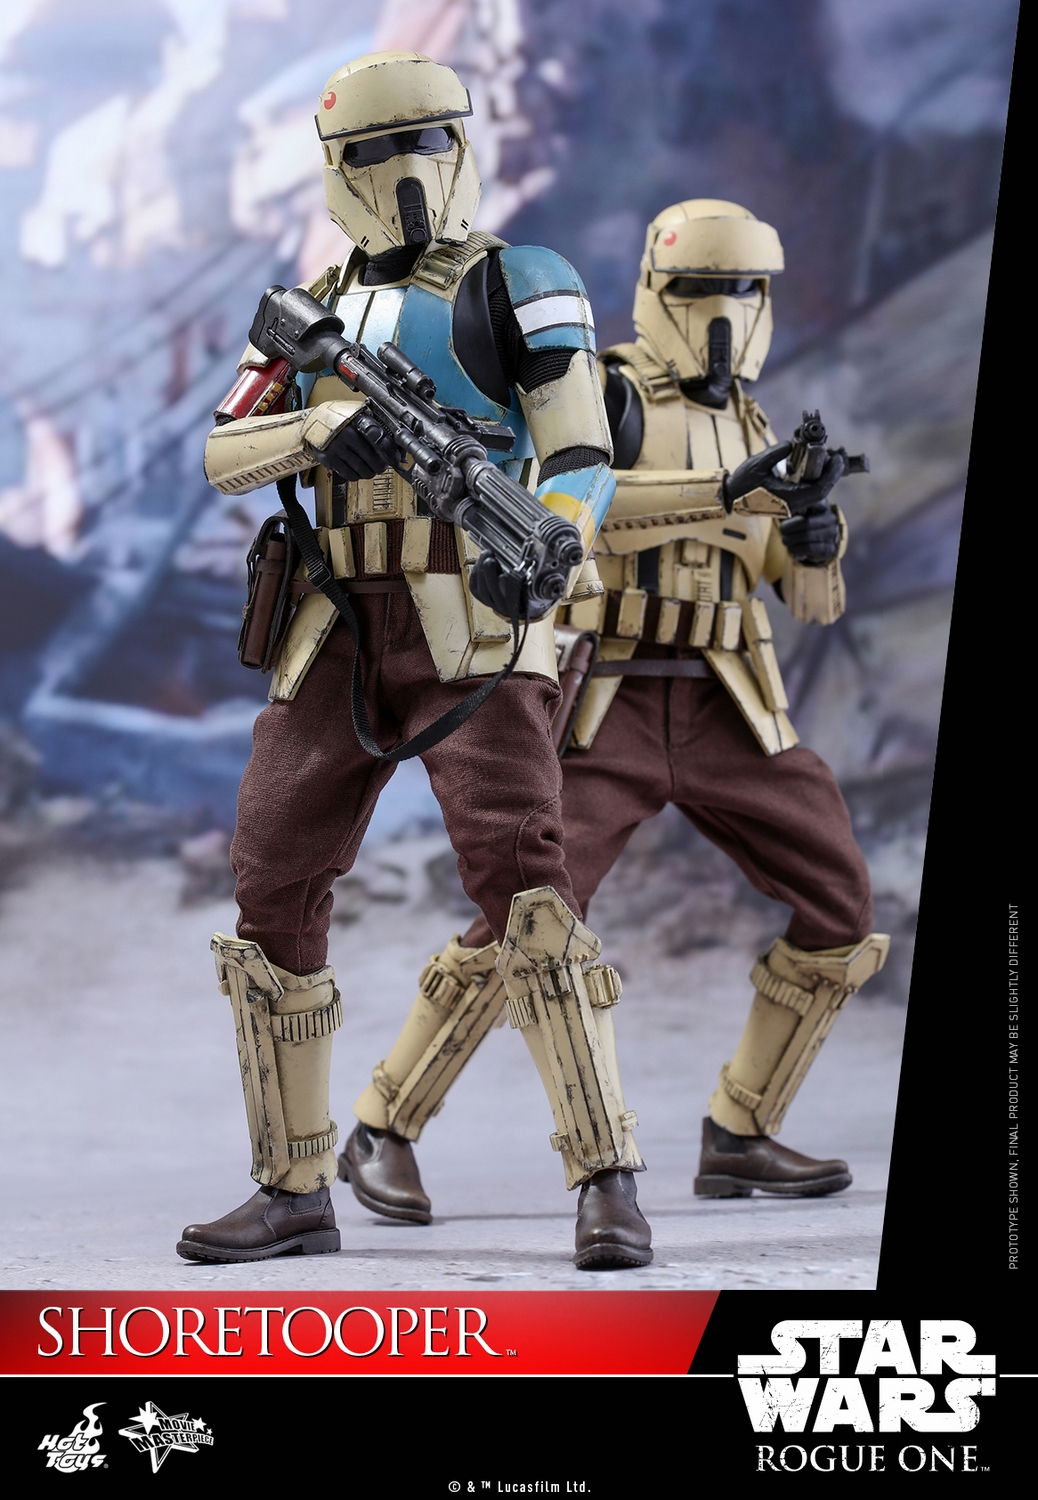 hot-toys-star-wars-rogue-one-shoretrooper-collectible-figure-092916-014.jpg